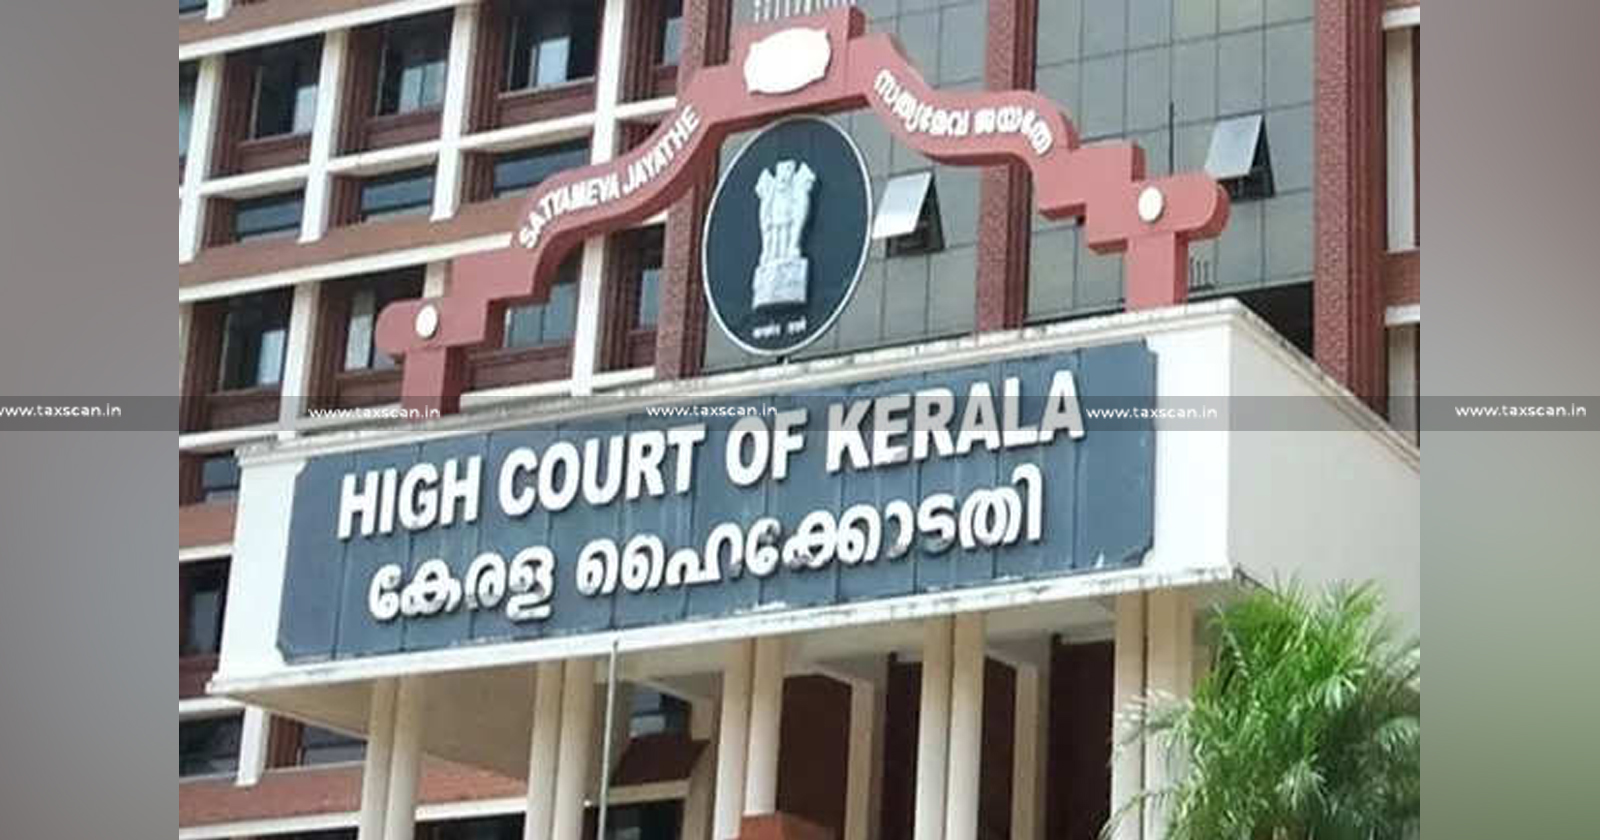 Non co-operation - Concluding Proceedings - VAT Tribunal - Kerala High Court - Dismisses Writ Petition - Writ Petition - High Court News - Tax News - VAT - Value Added Tax - TAXSCAN